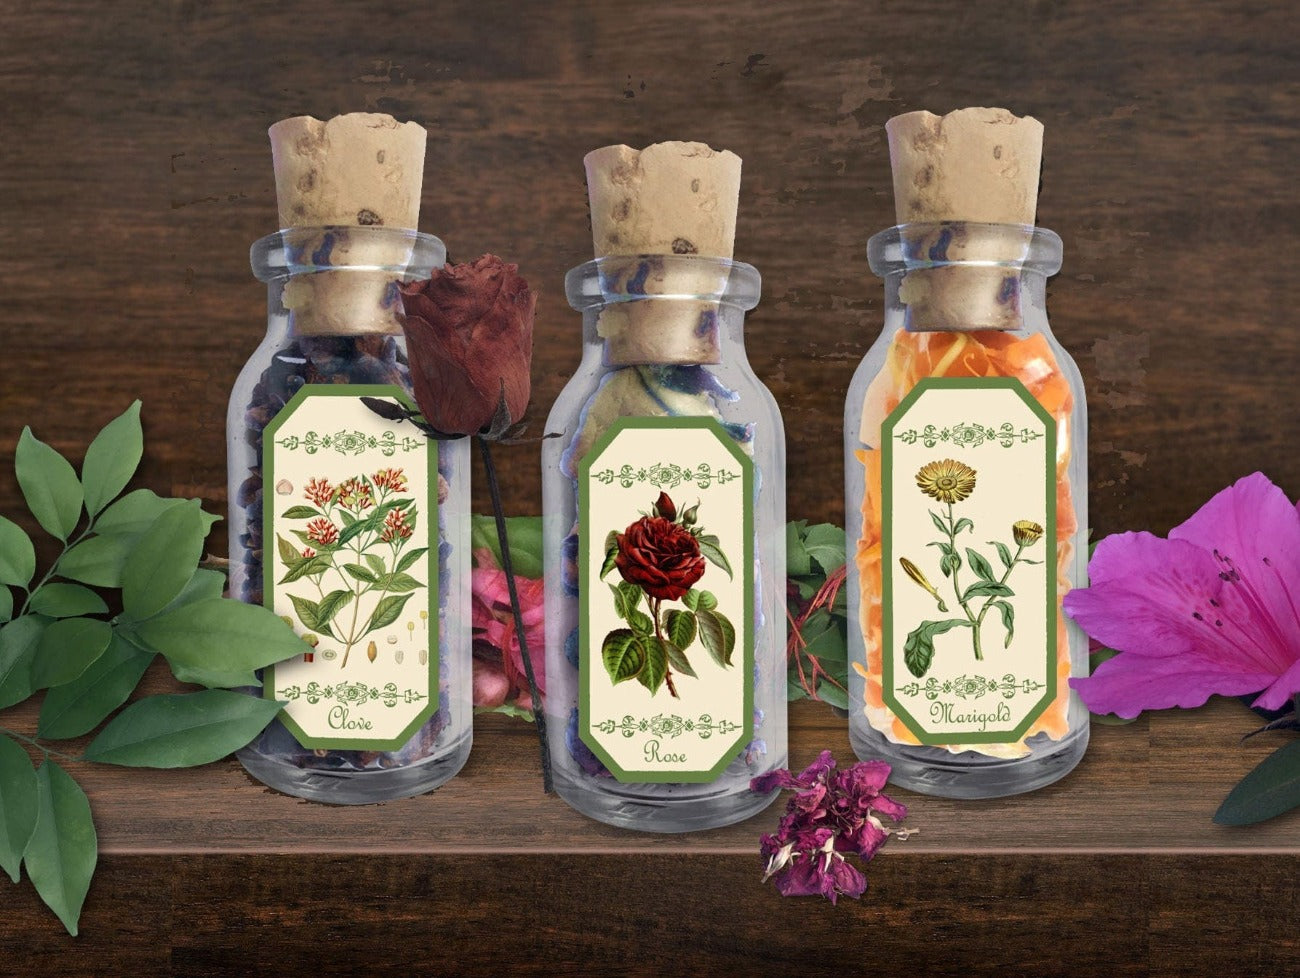 3 HERBAL APOTHECARY LABELS Placed on small jars filled with herbs with corked lids - Morgana Magick Spell